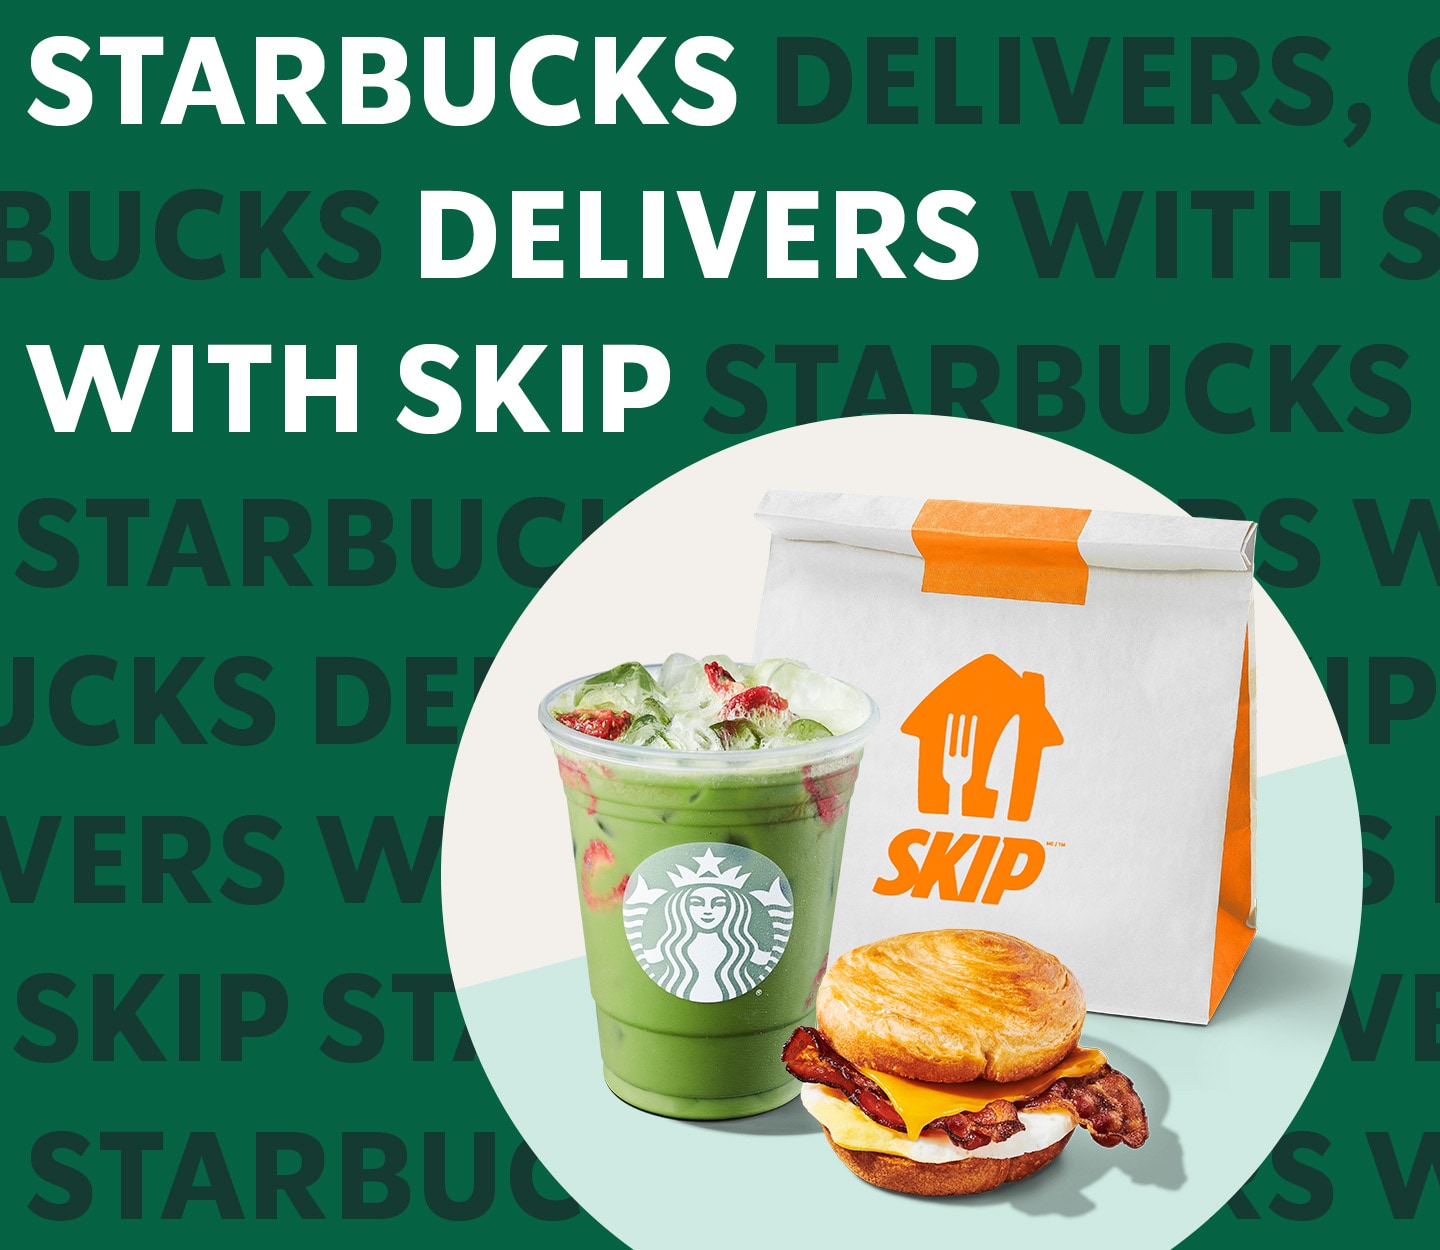 Starbucks Delivers with Skip | Starbucks products with Skip takeout bag